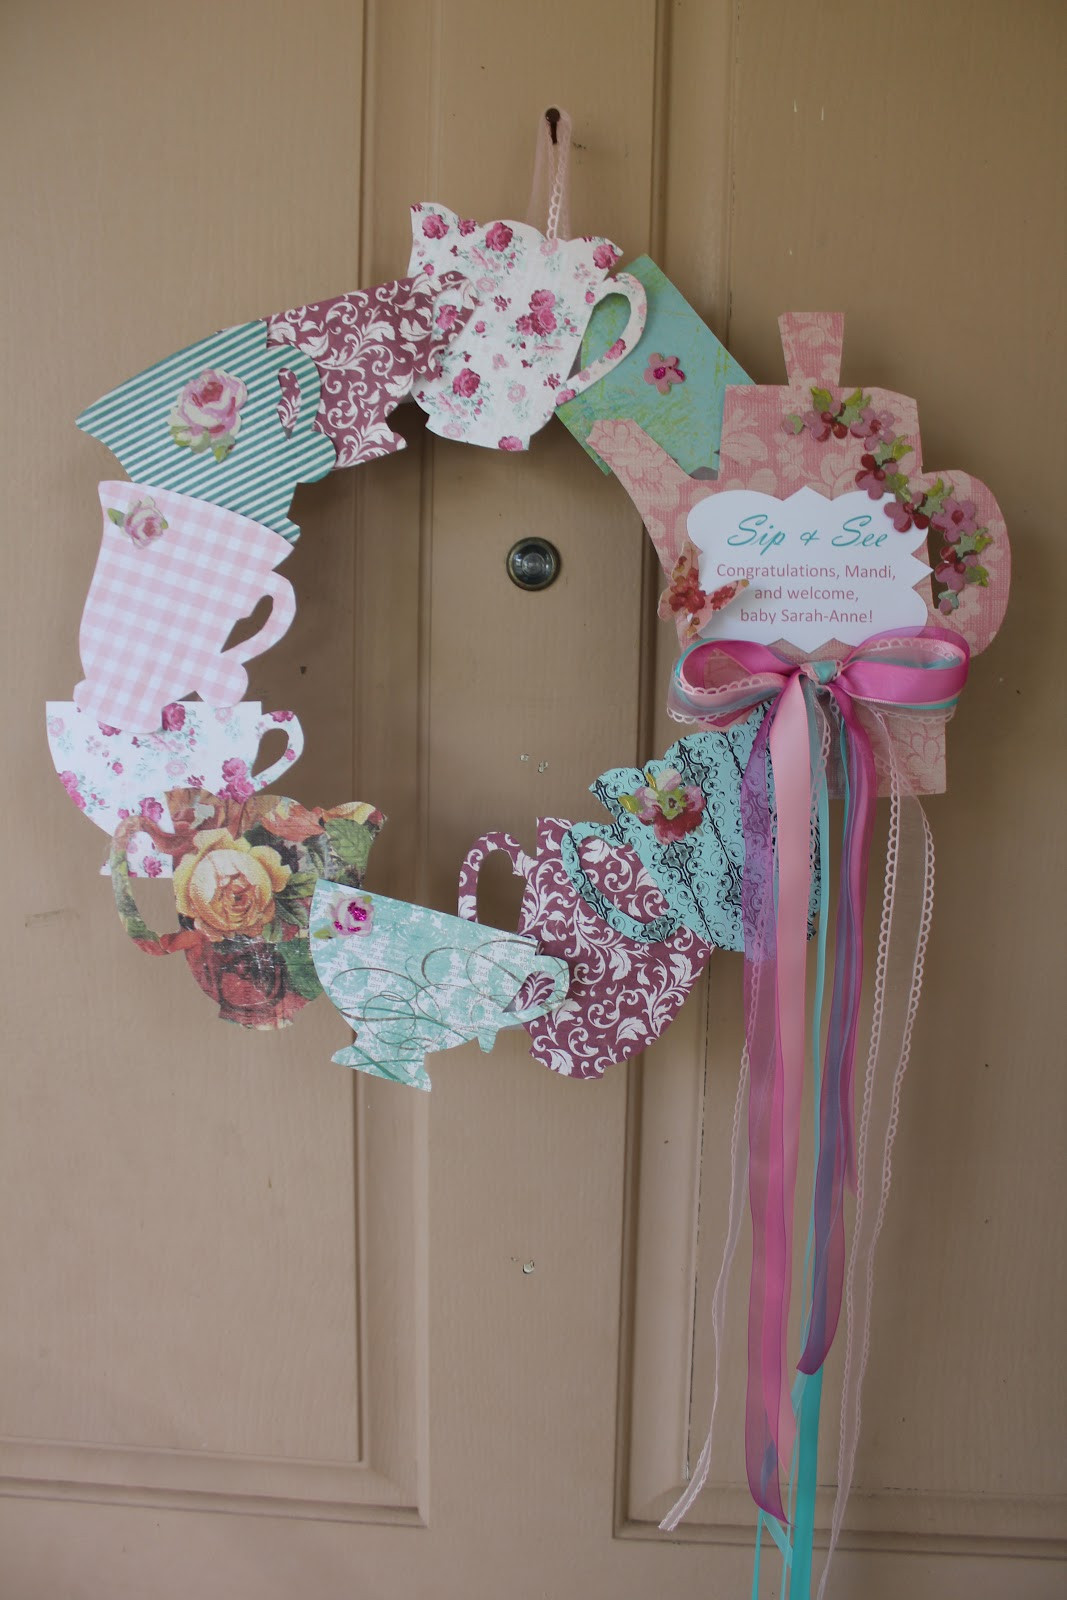 Tea Party Crafts Ideas
 Precise is Nice Sip and See Baby Shower tea party style